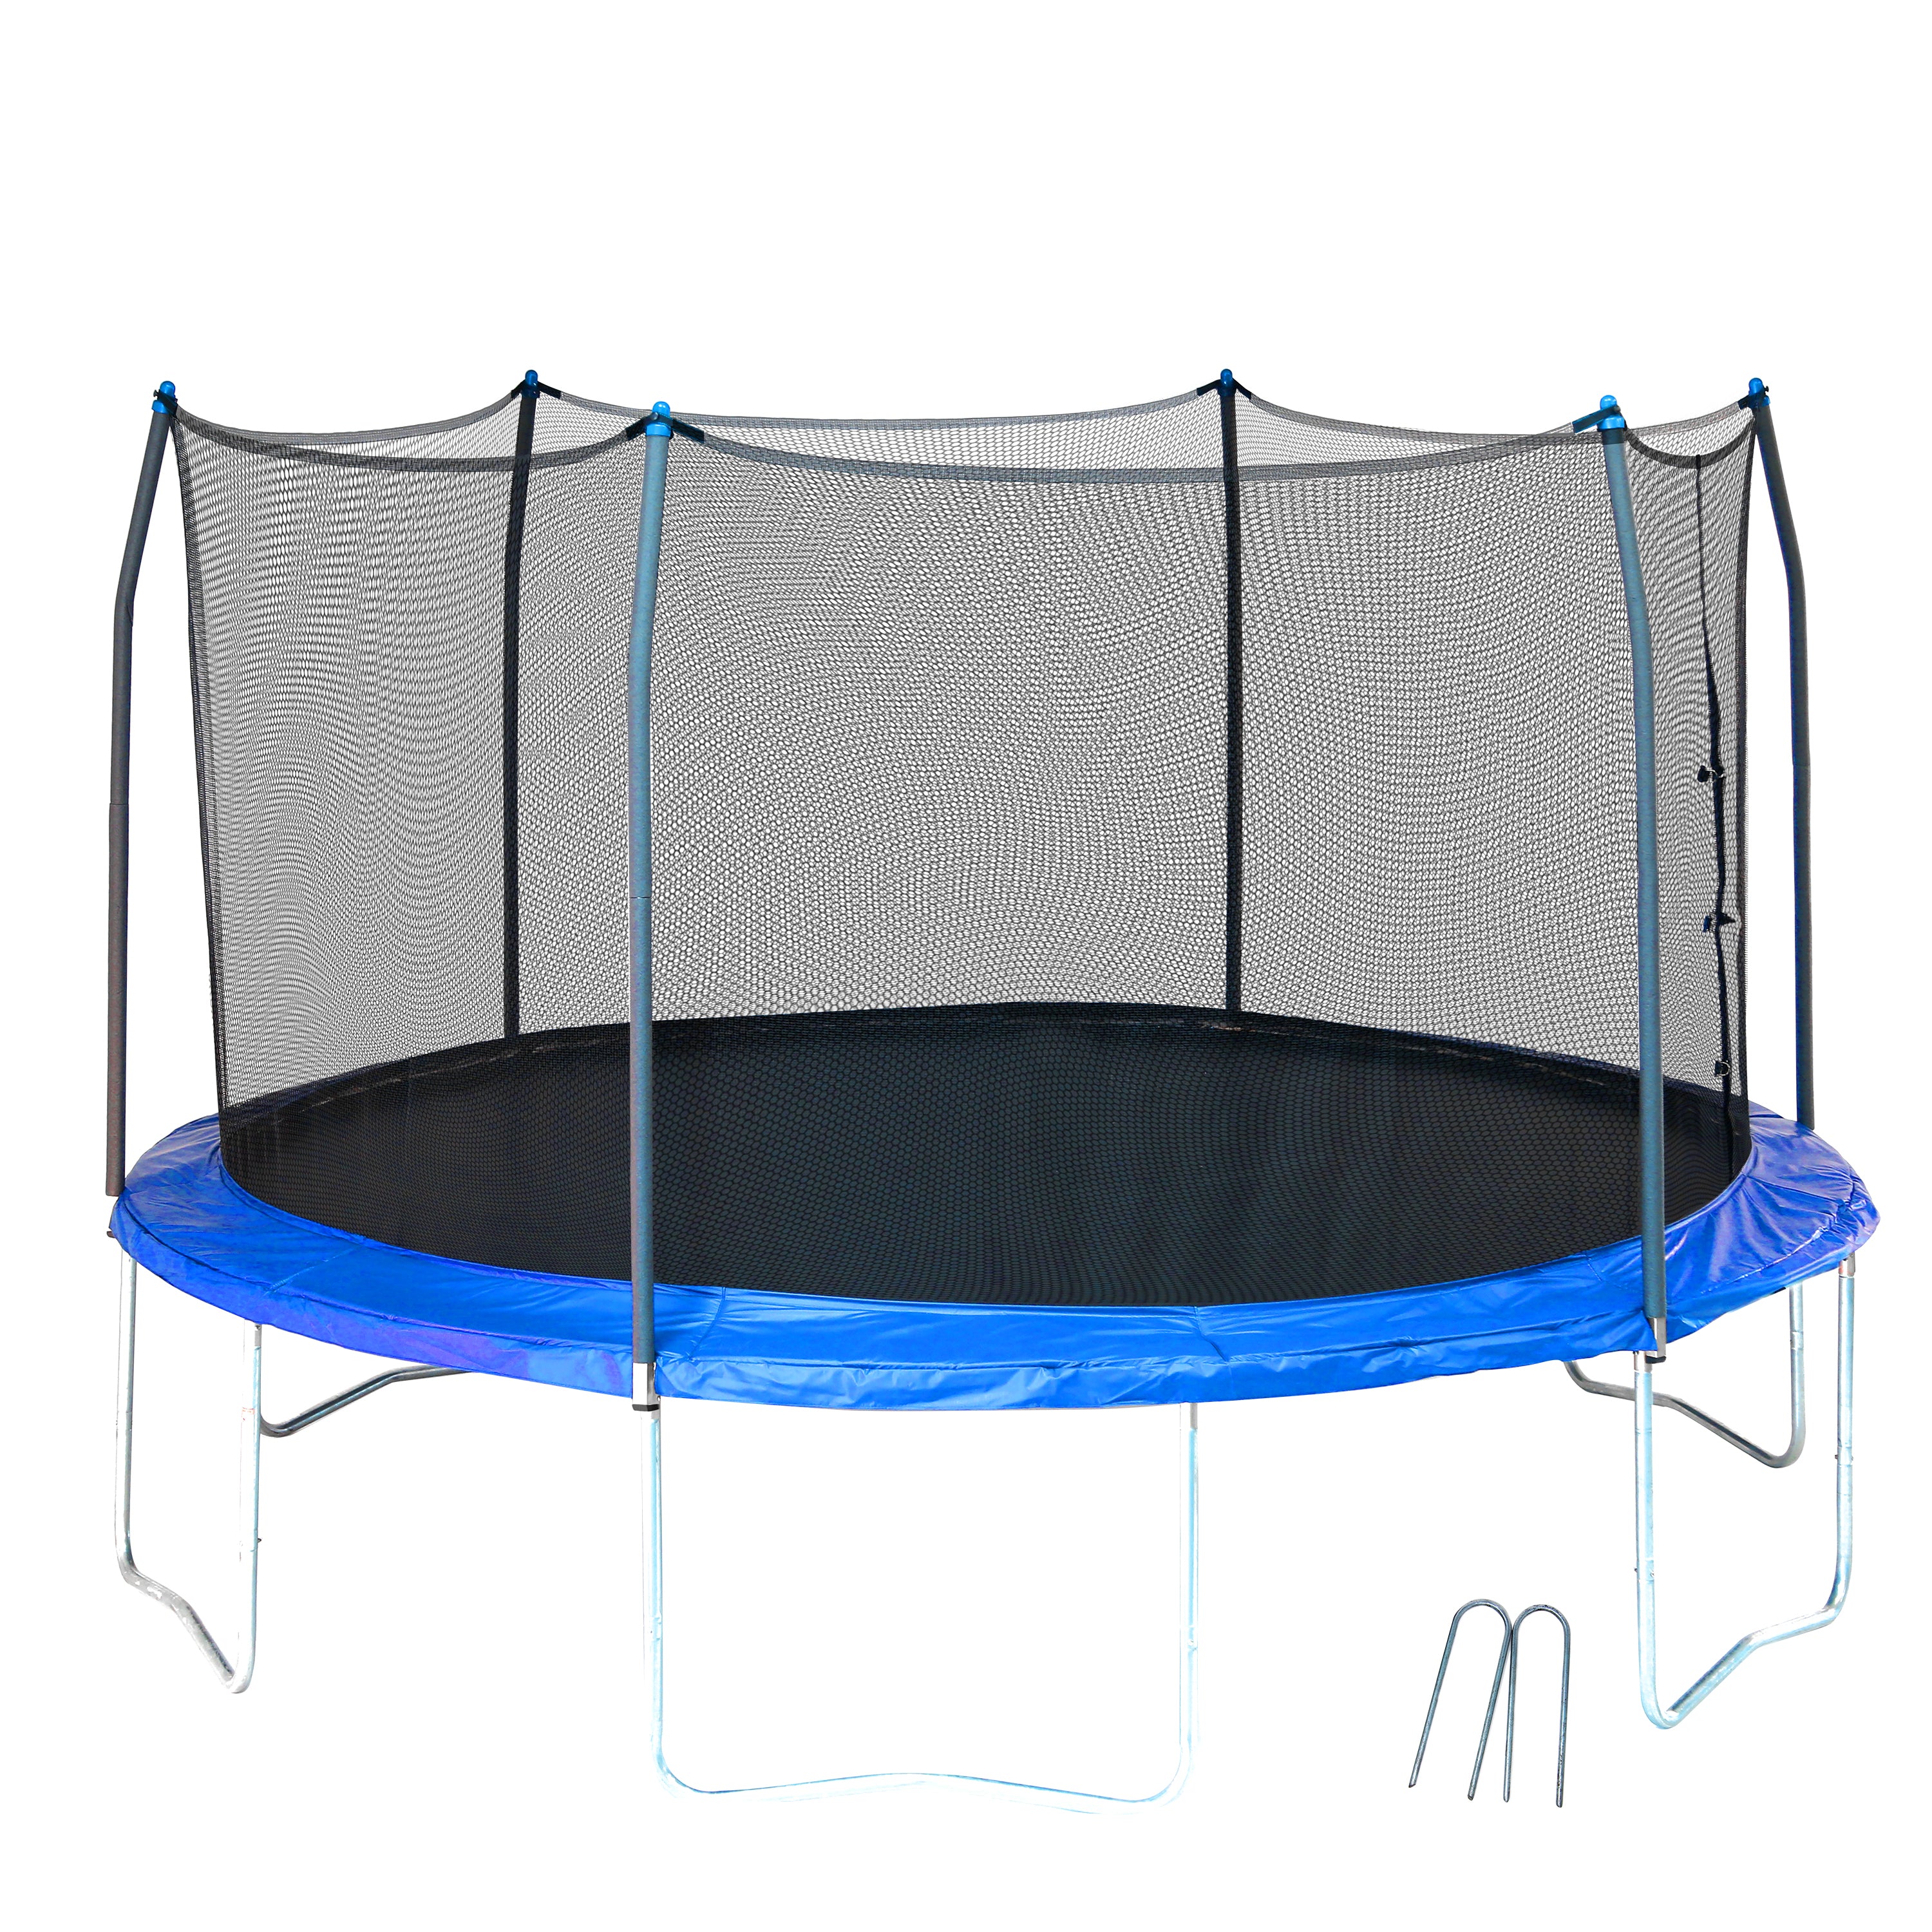 Spring kit Trampolines & Accessories at